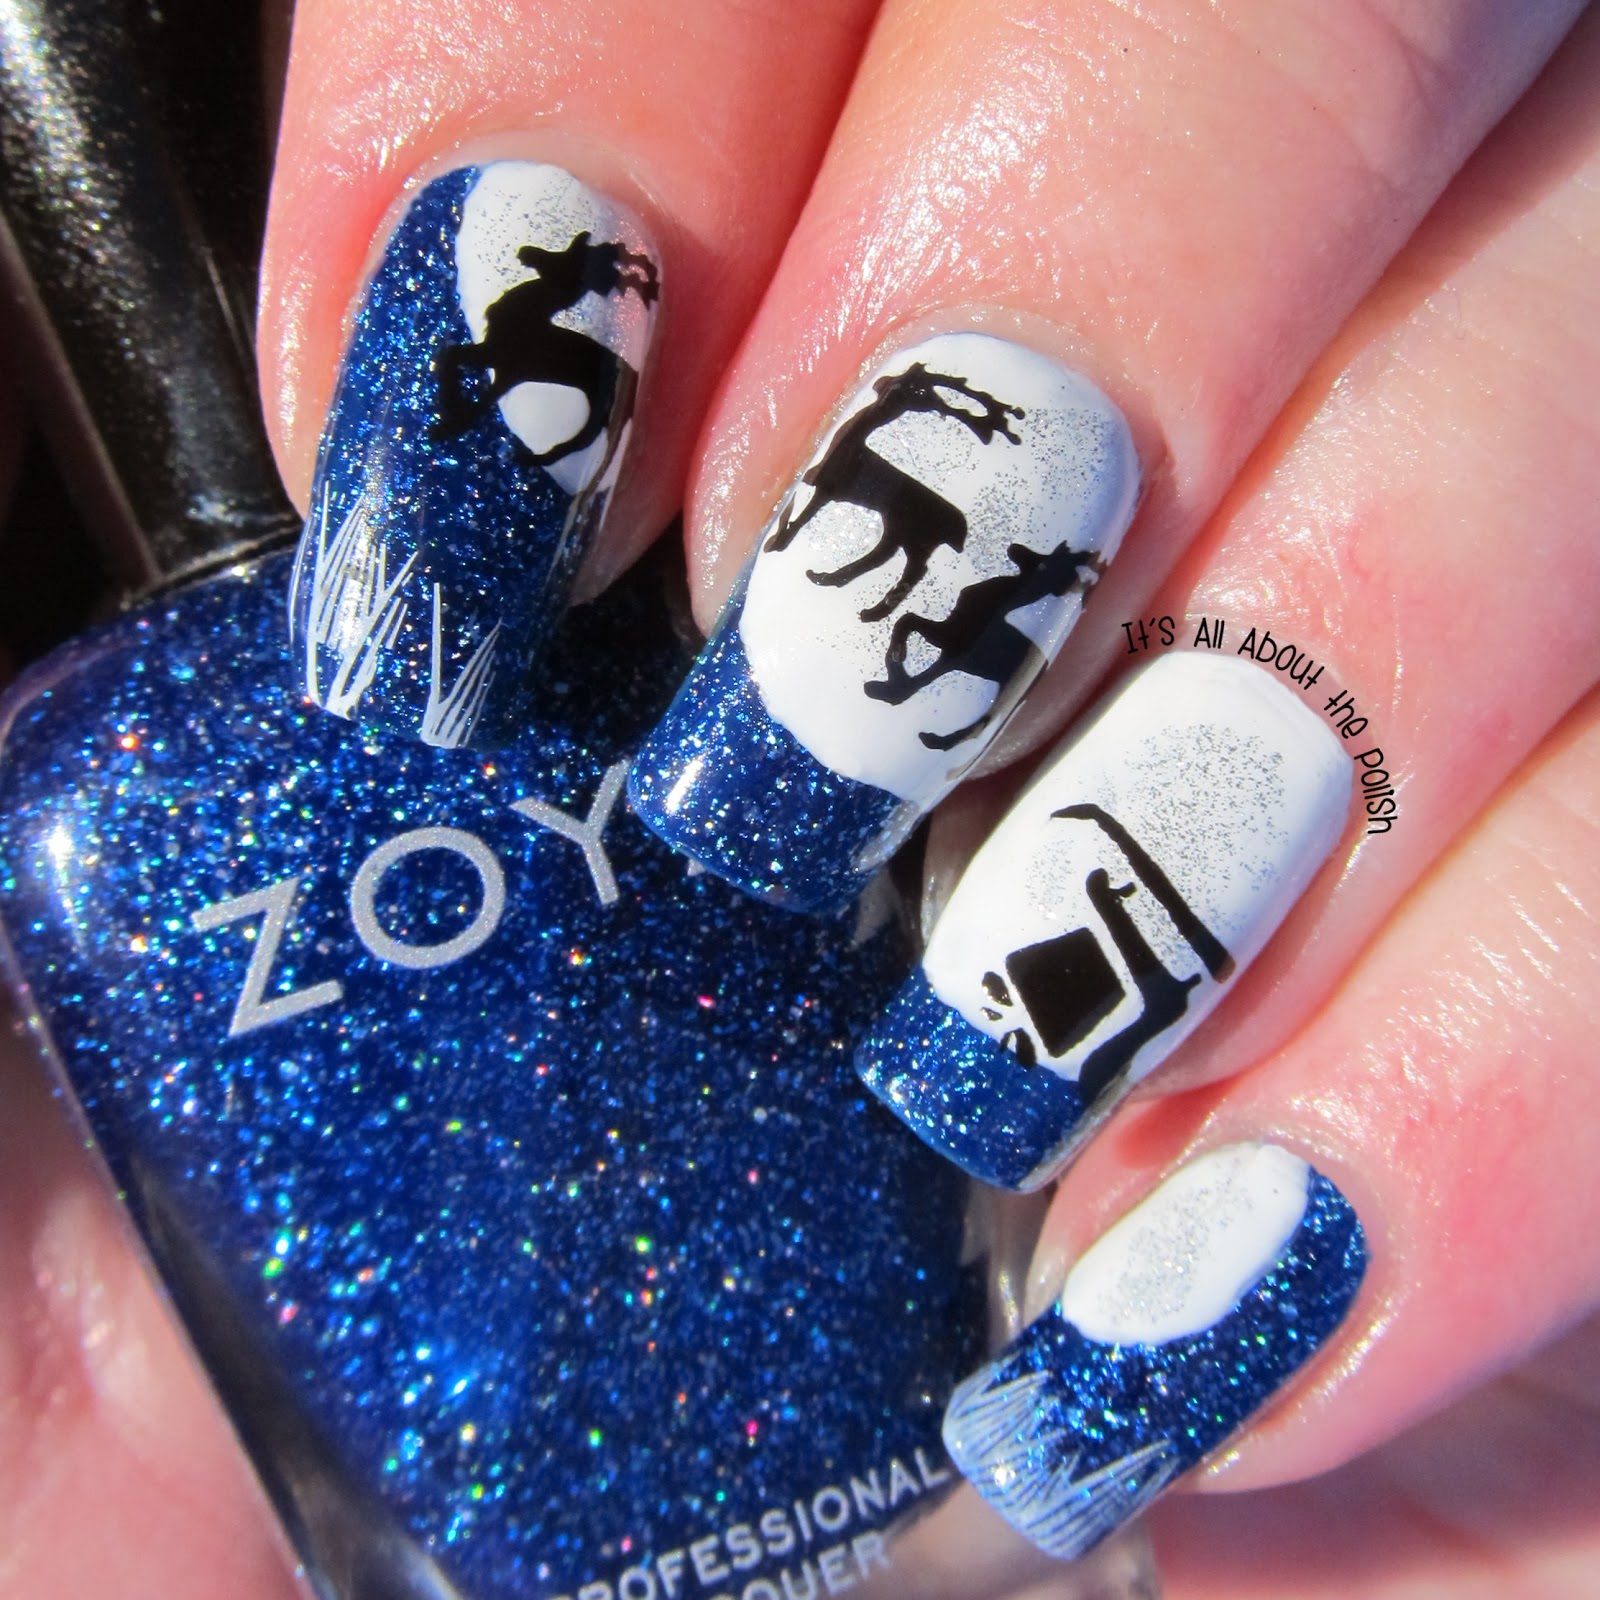 It's all about the polish: Santa and Sleigh with Moon Nail art tutorial ...